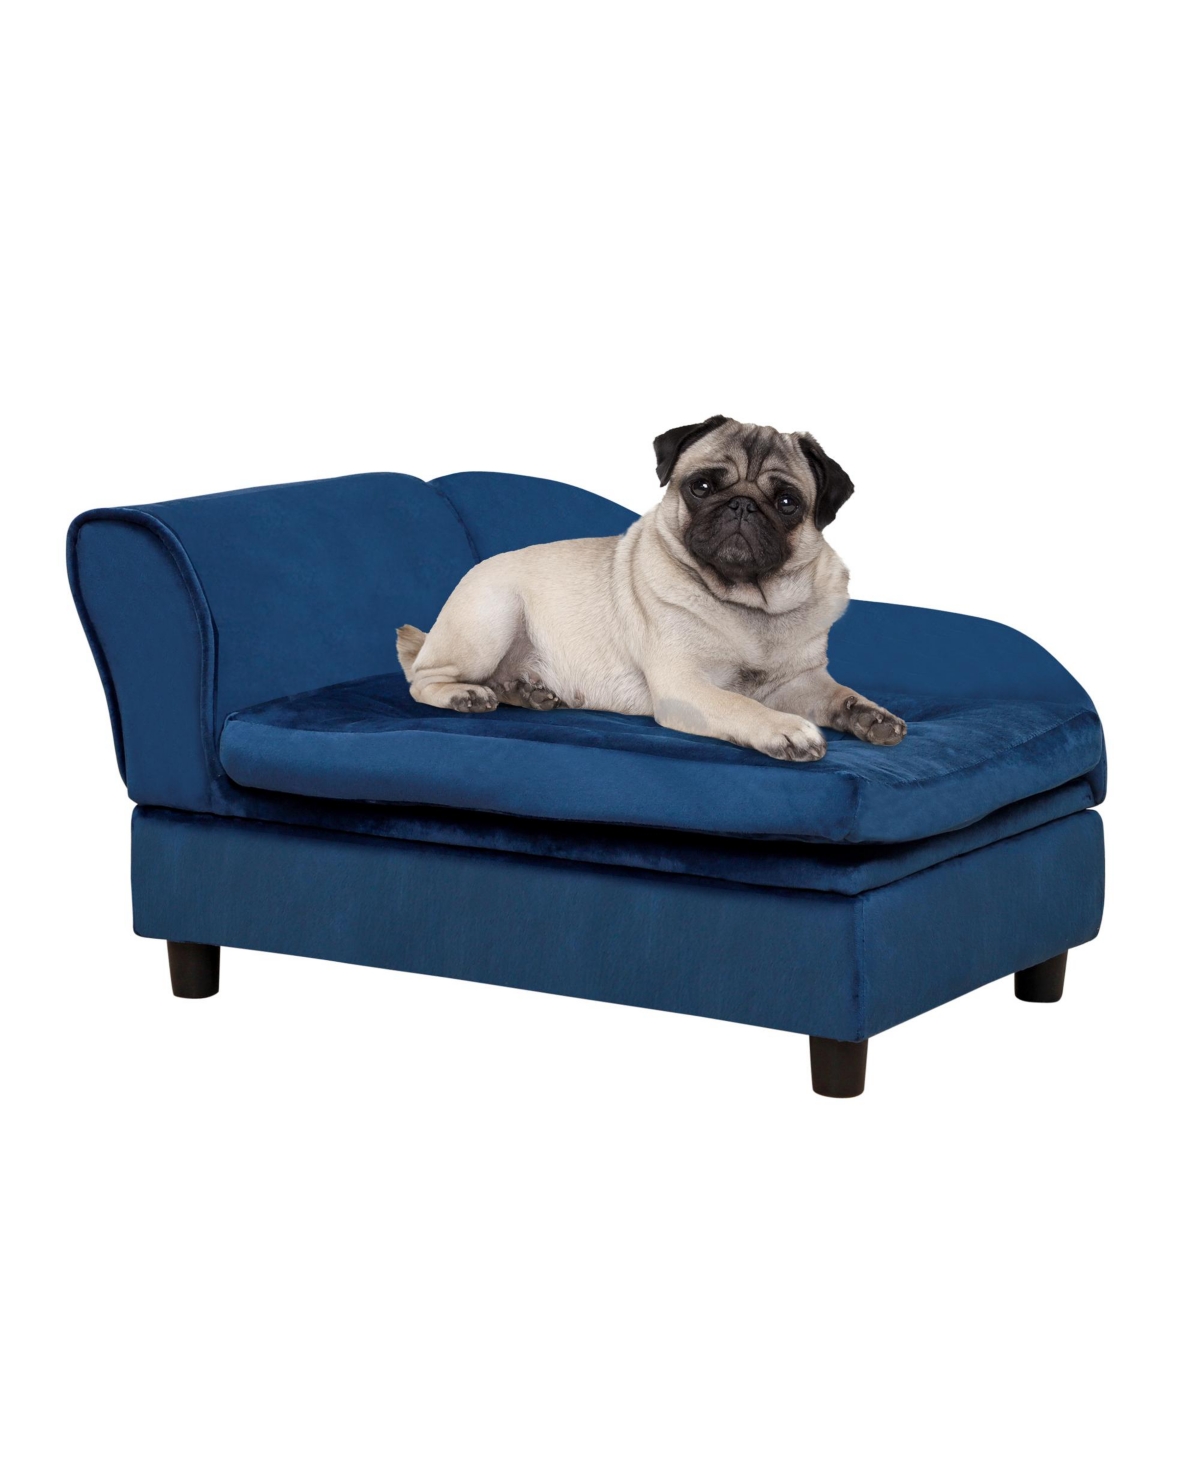 Luxury Fancy Dog Bed for Small Dogs with Hidden Storage, Small Dog Couch with Soft 3" Foam, Blue - Blue